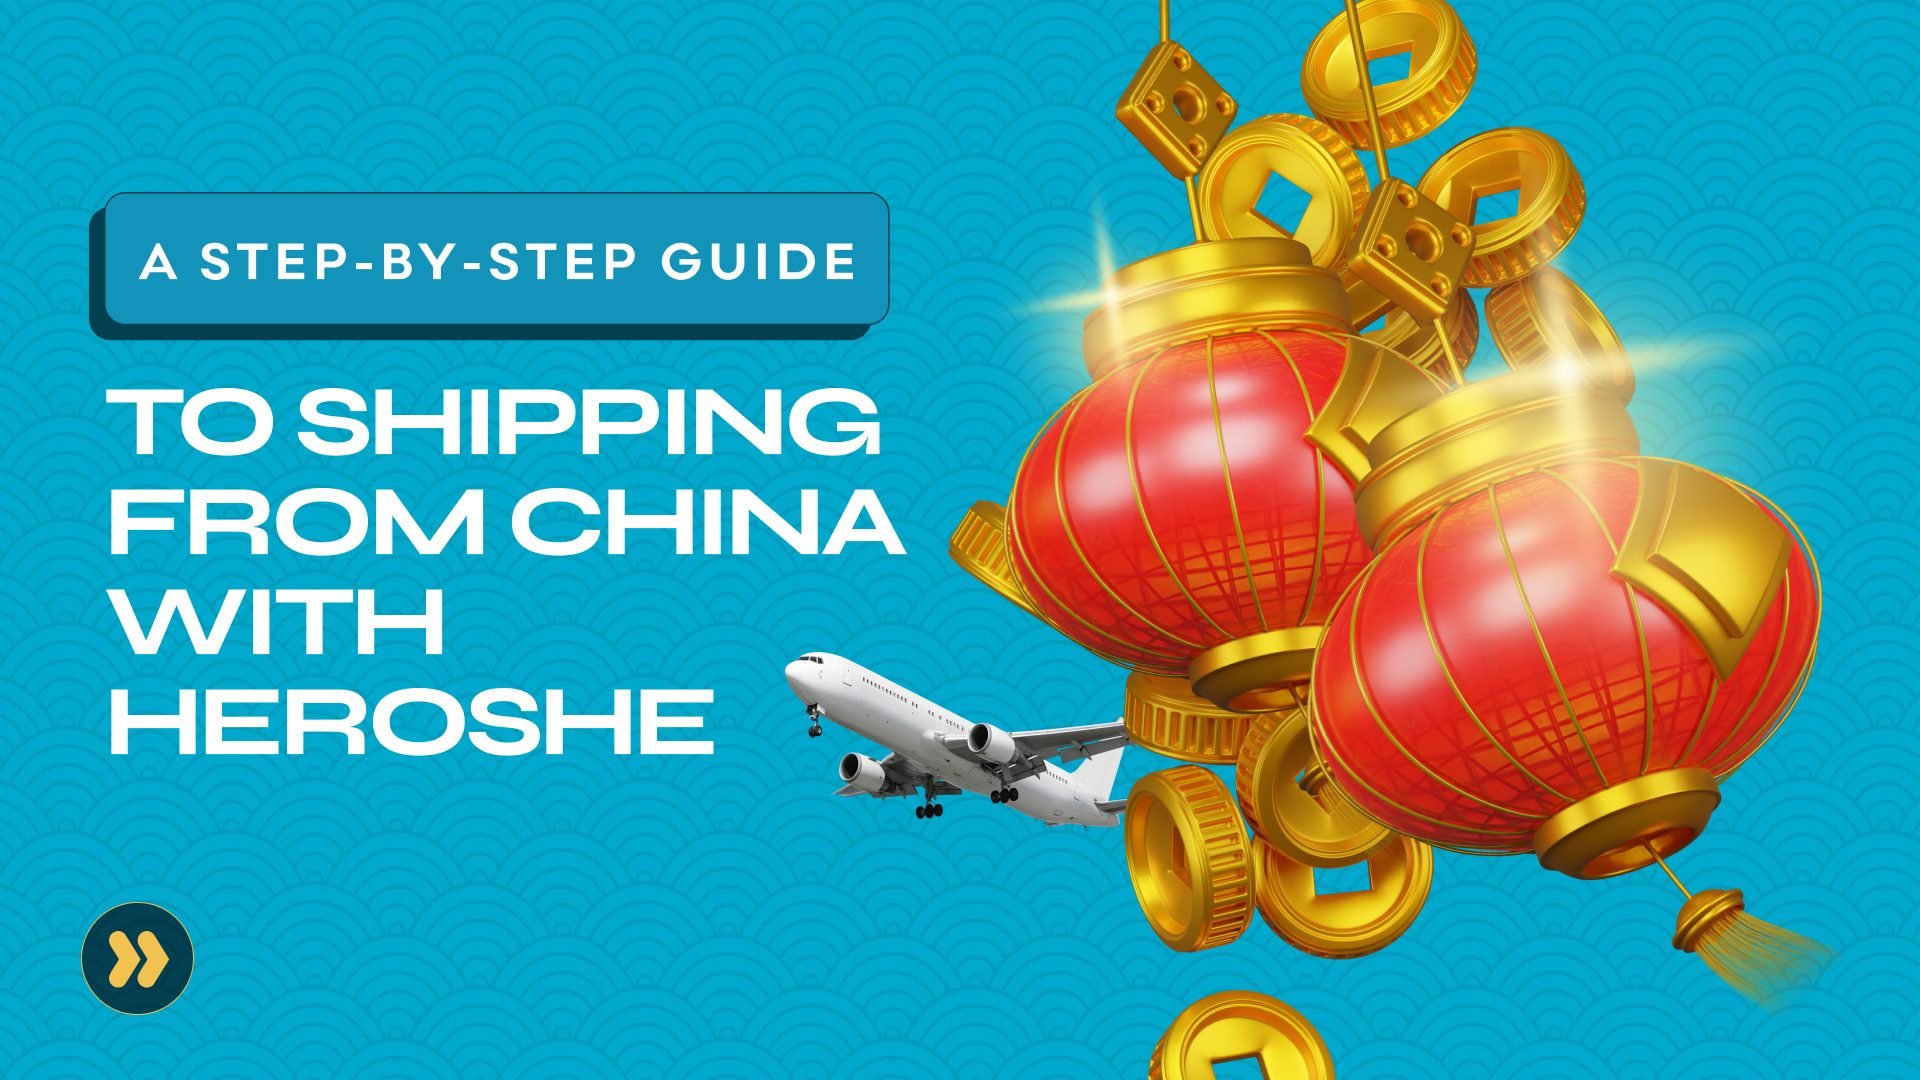 A Step-by-Step Guide to Shipping From China With Heroshe